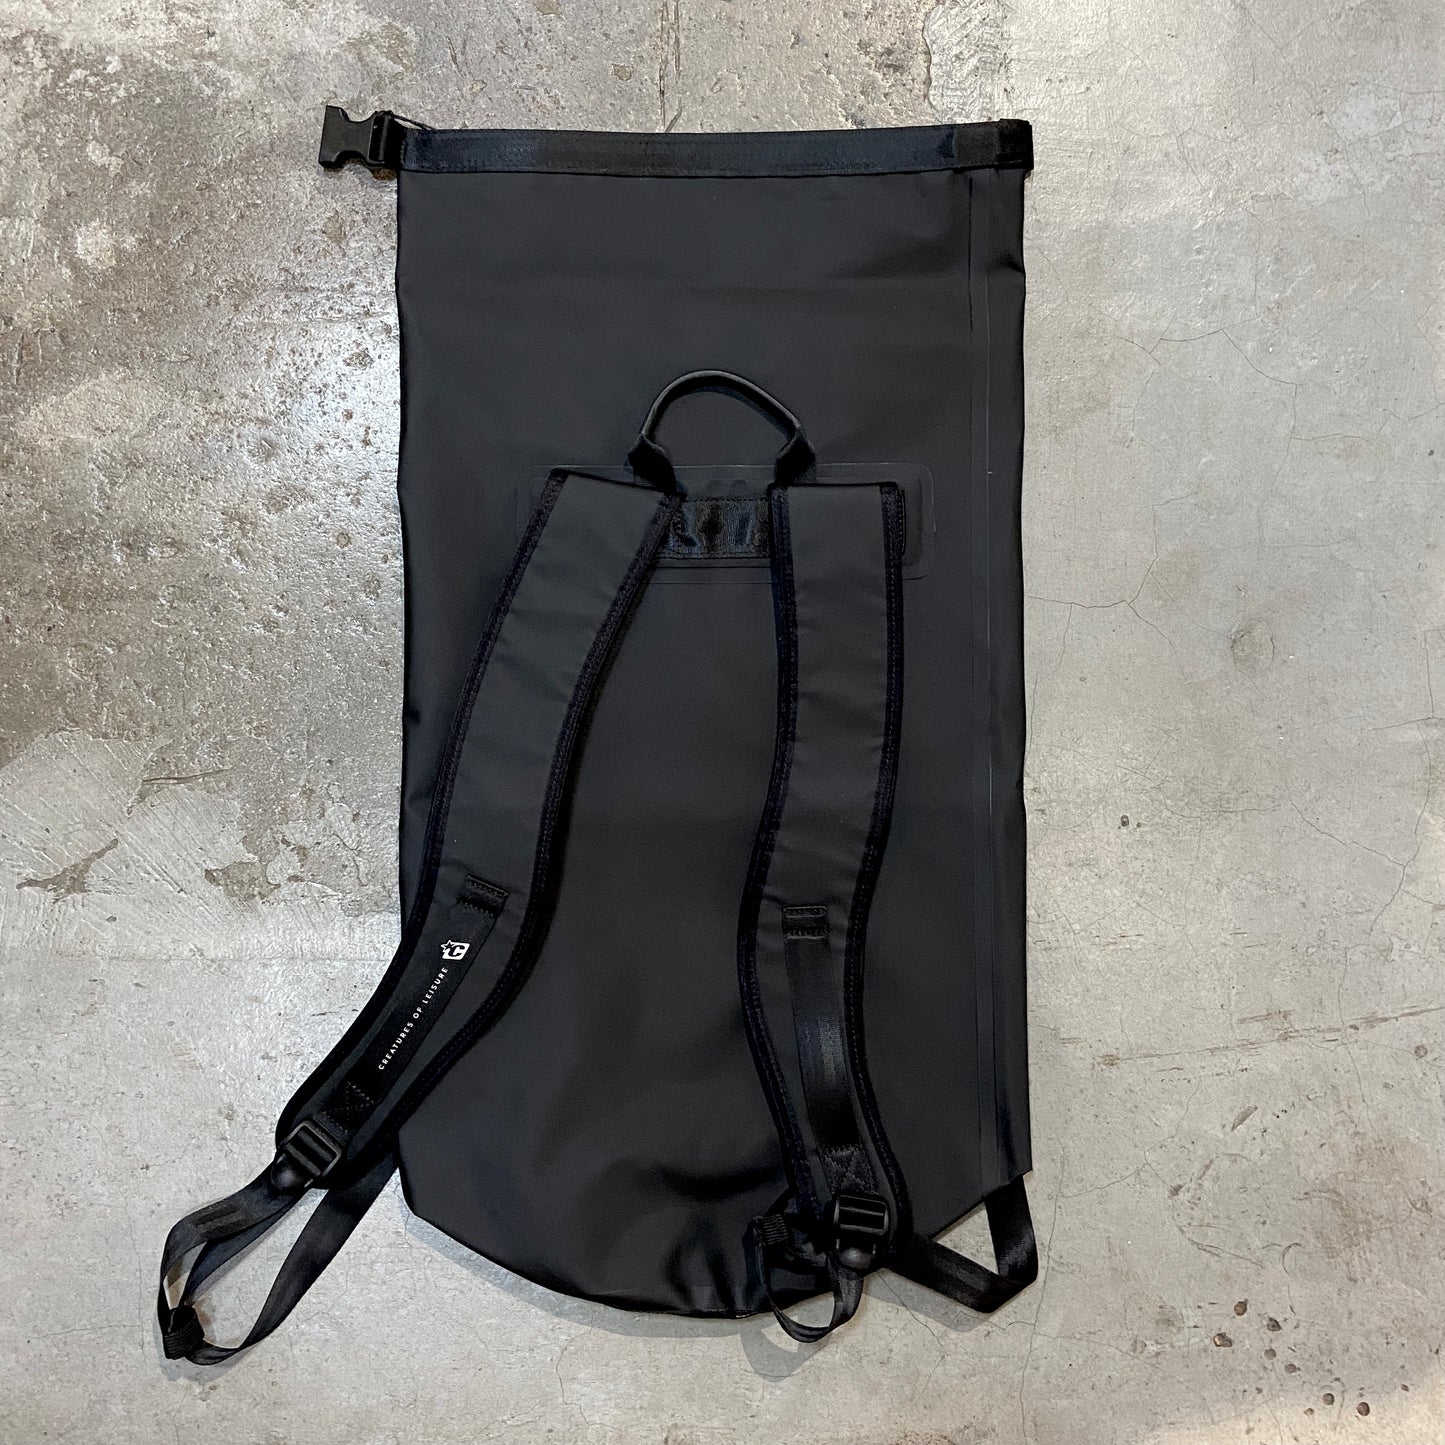 CREATURES OF LEISURE   DAY USE DRY BAG 35L